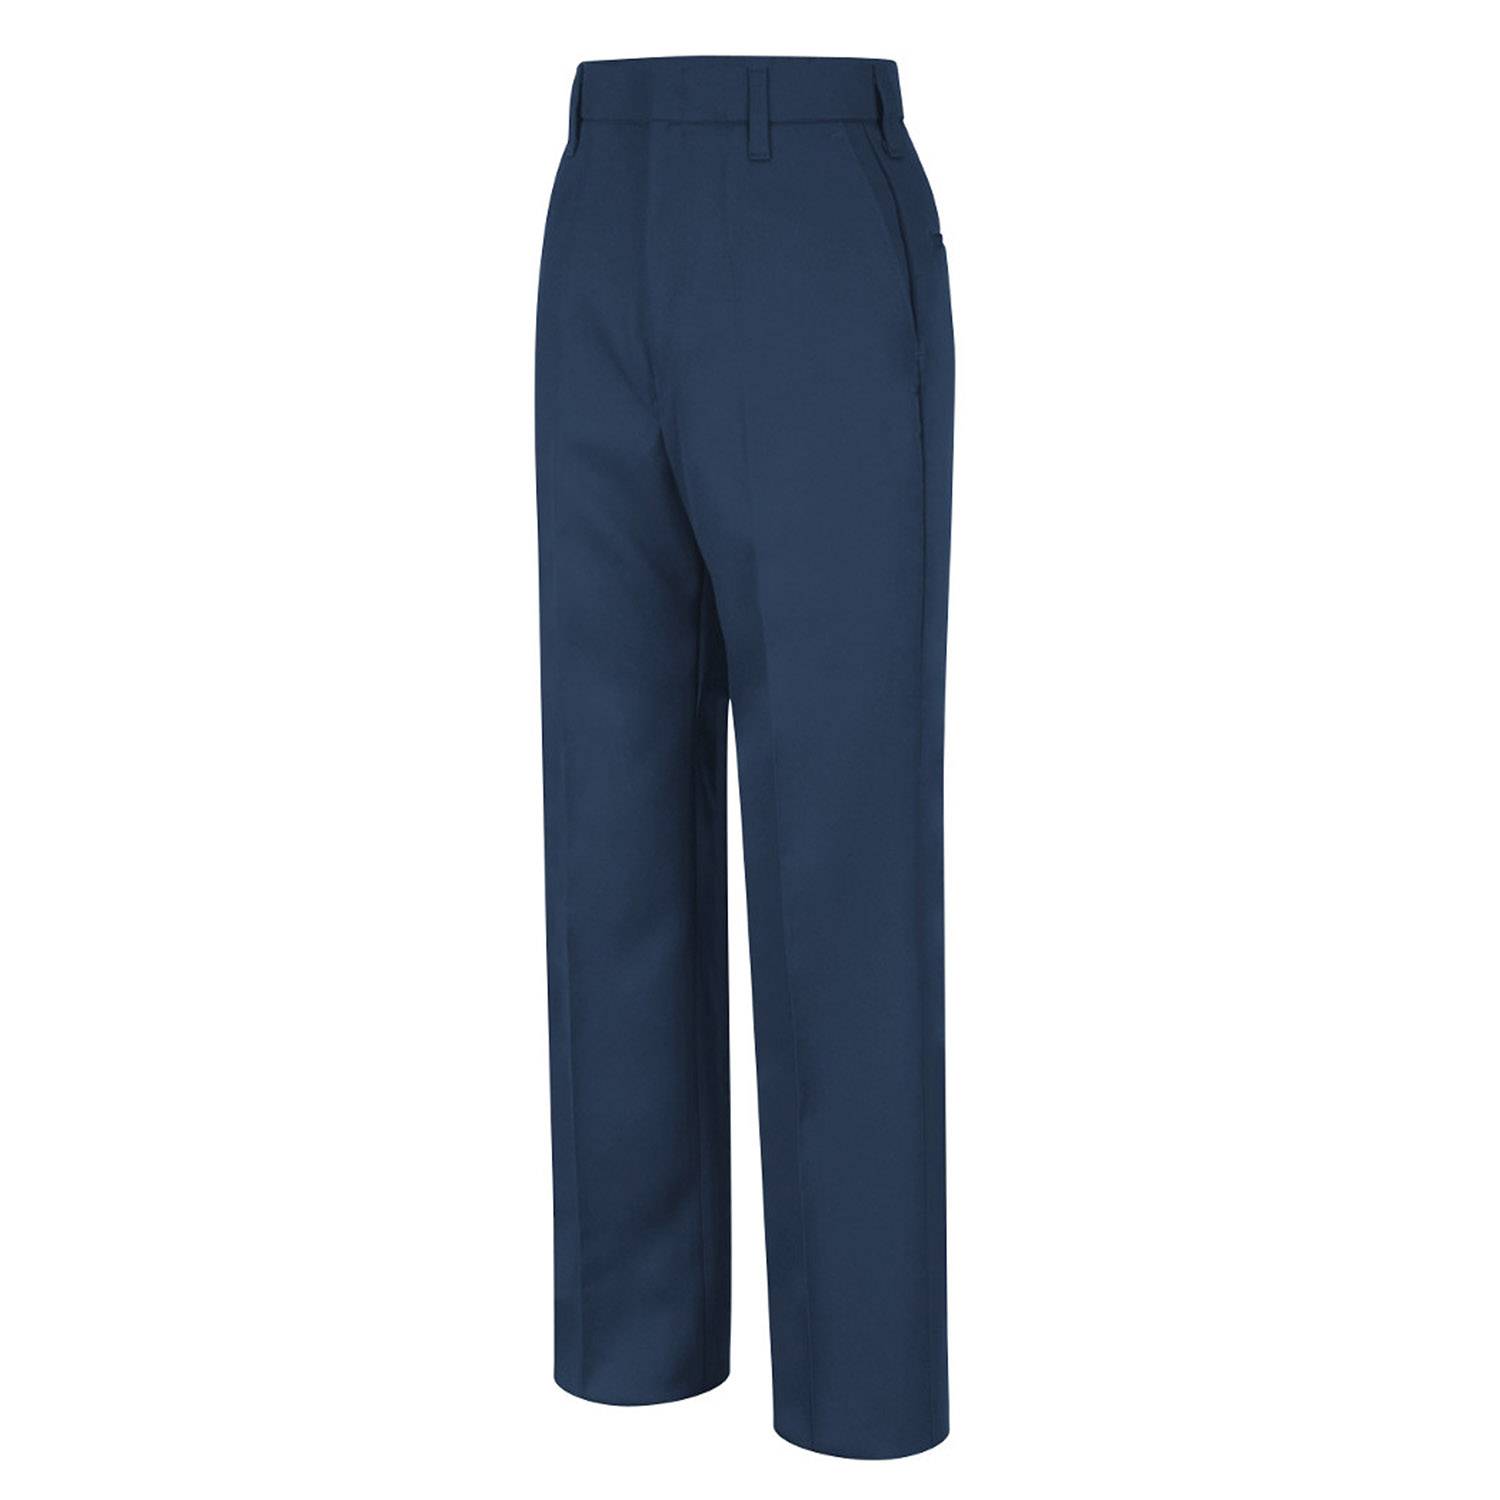 HORACE SMALL WOMEN'S SENTINEL SECURITY PANTS